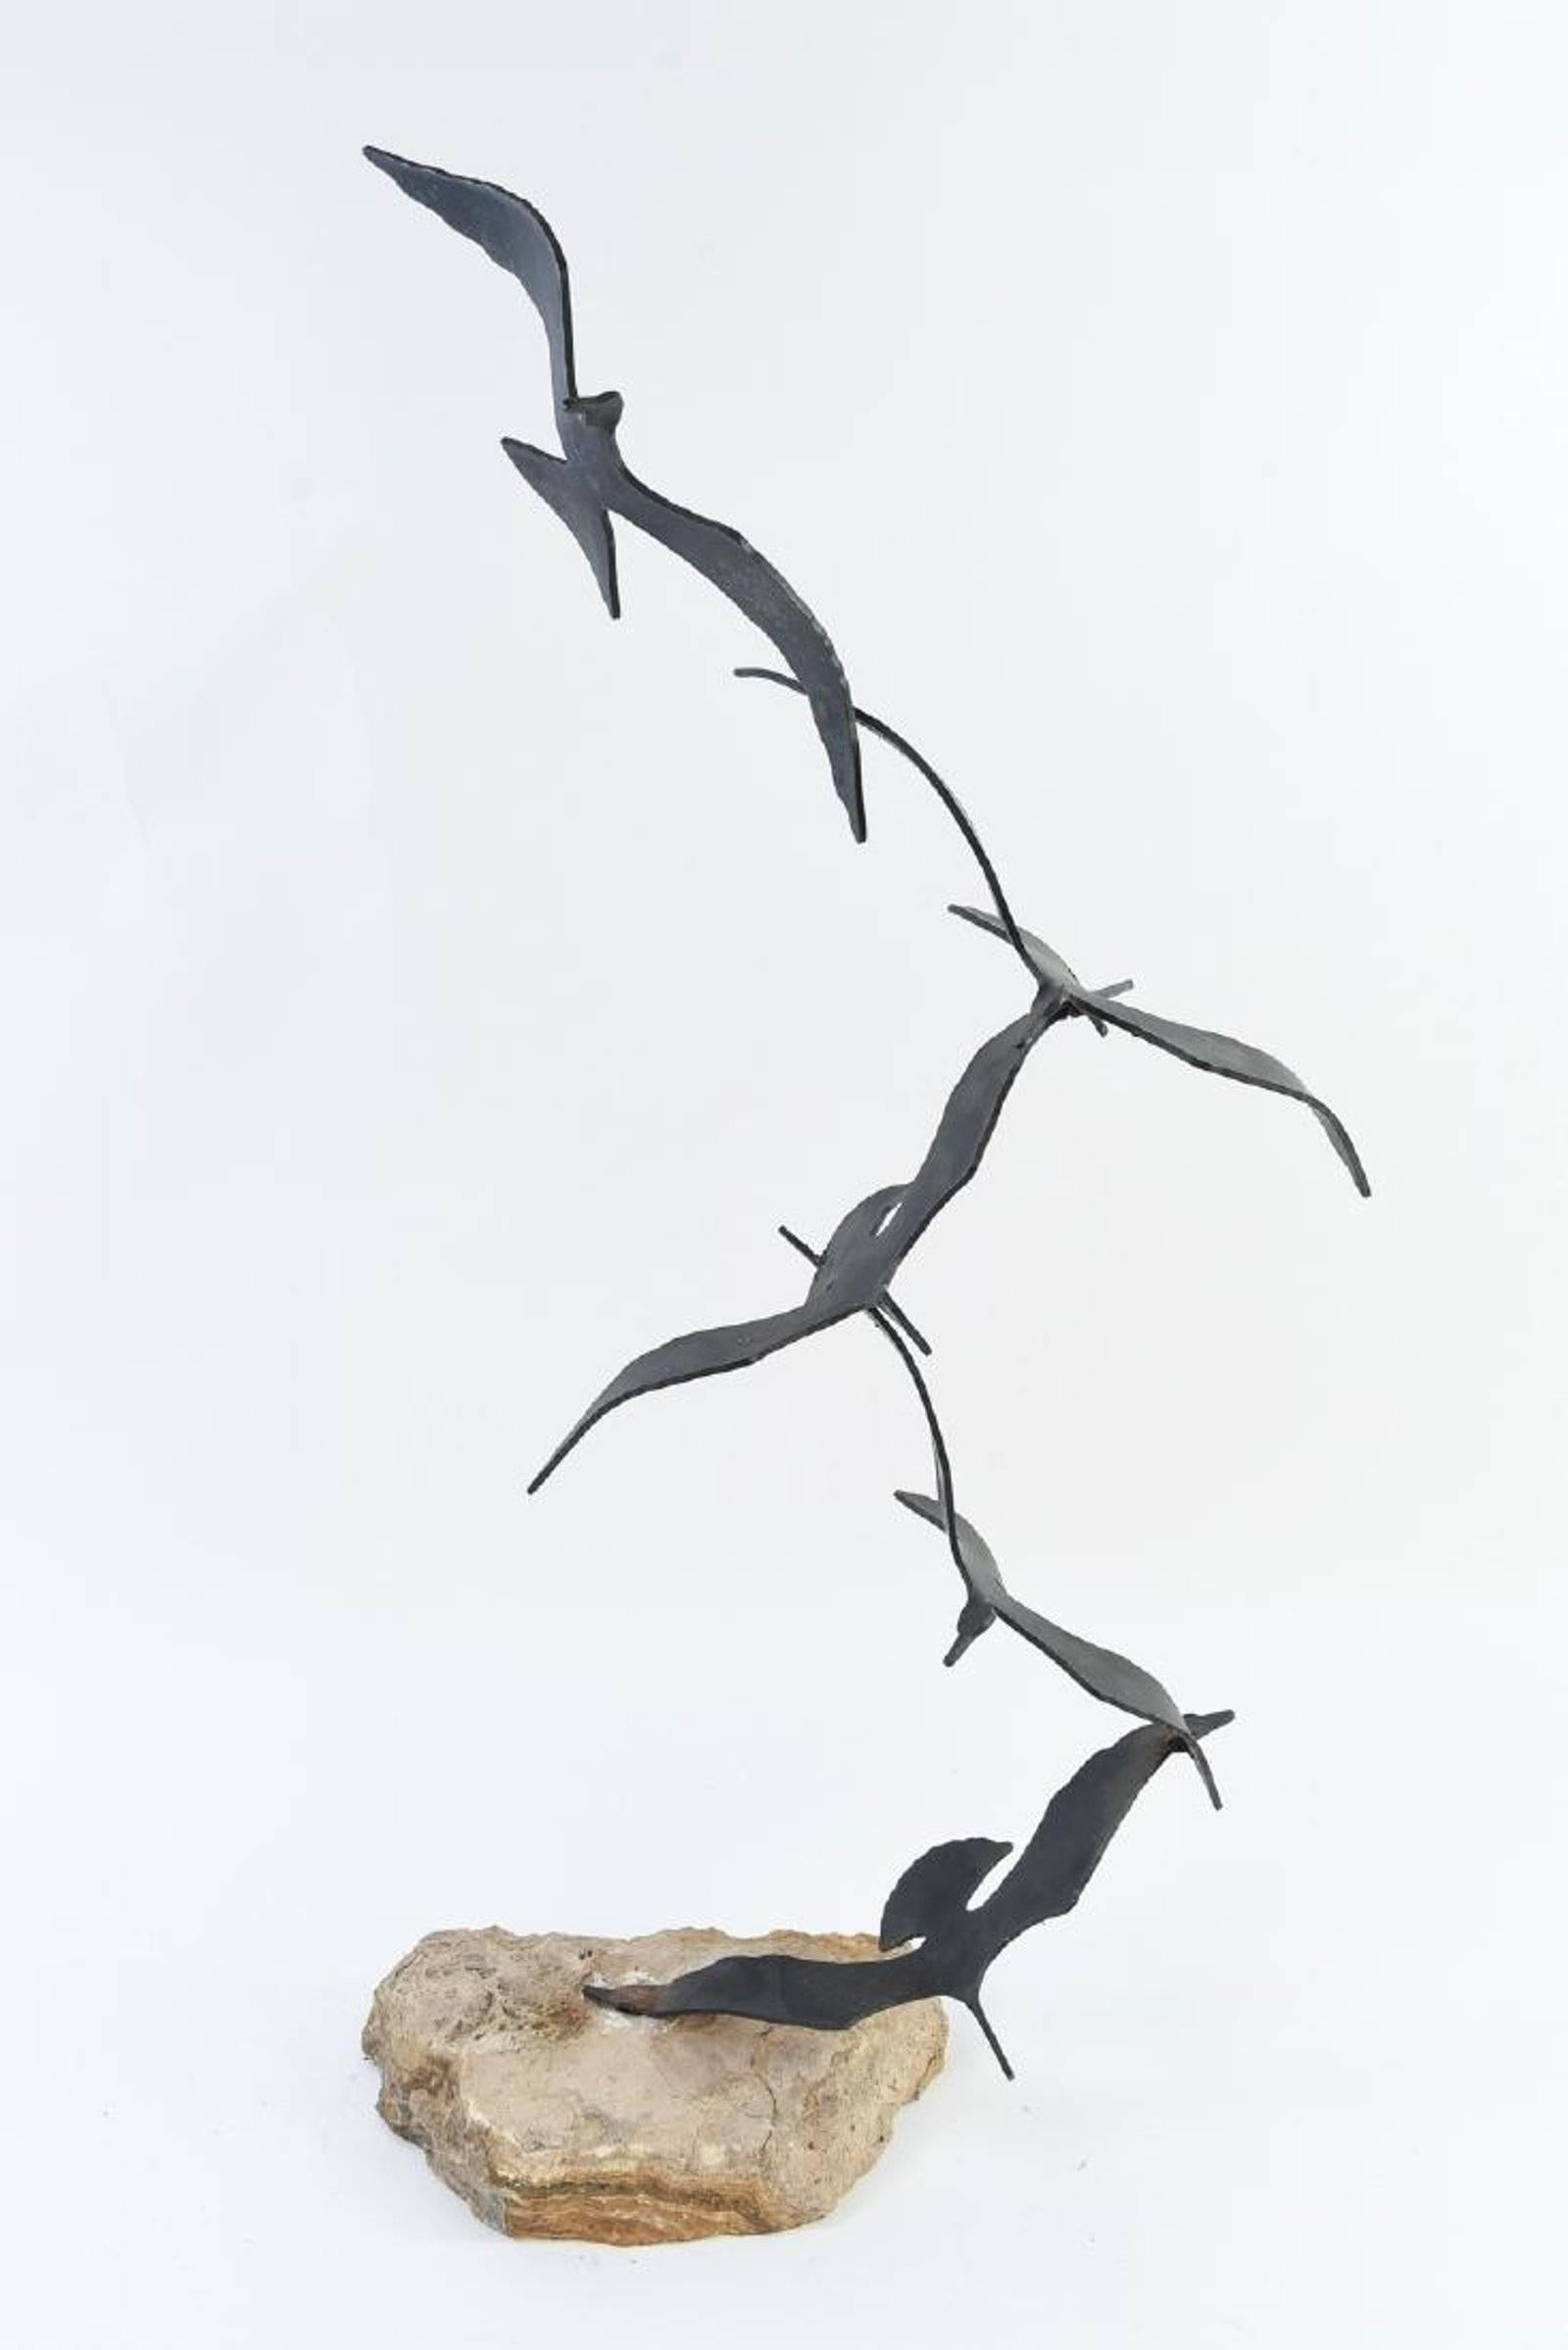 A Mid-Century Modern Curtis Jere sculpture. Welded metal flock of birds sculpture mounted on a natural stone. The birds are in a flat black finish and retain the artist signature and date on one of the wings.